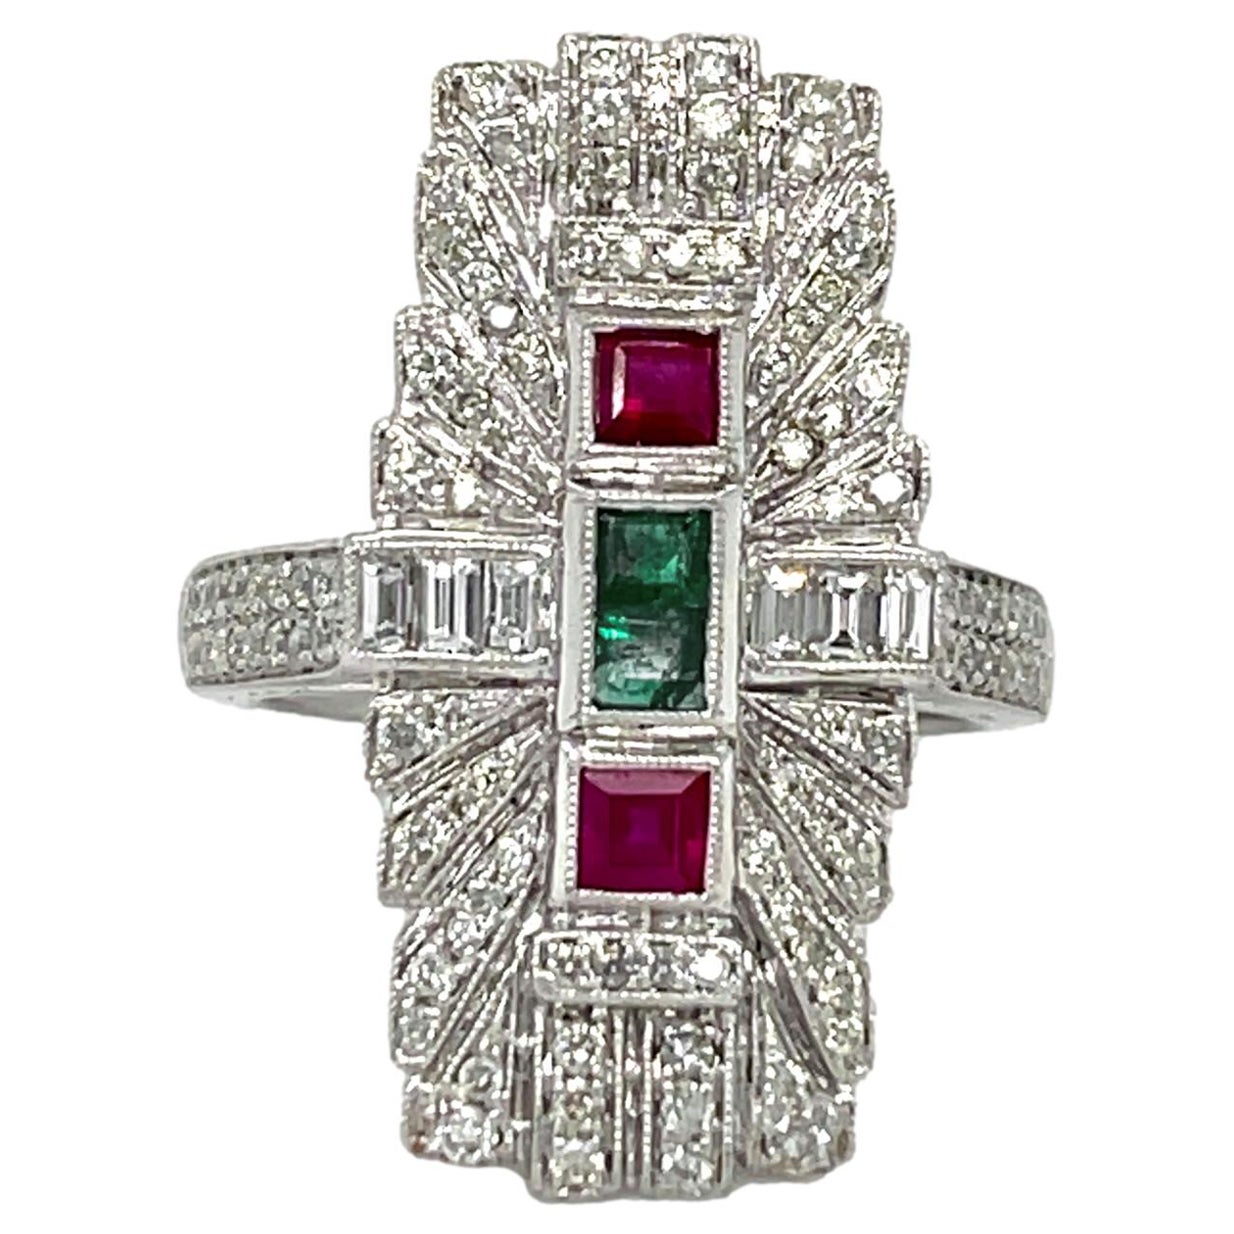 Antique Emerald, Ruby and Diamond Ring in 14k White Gold